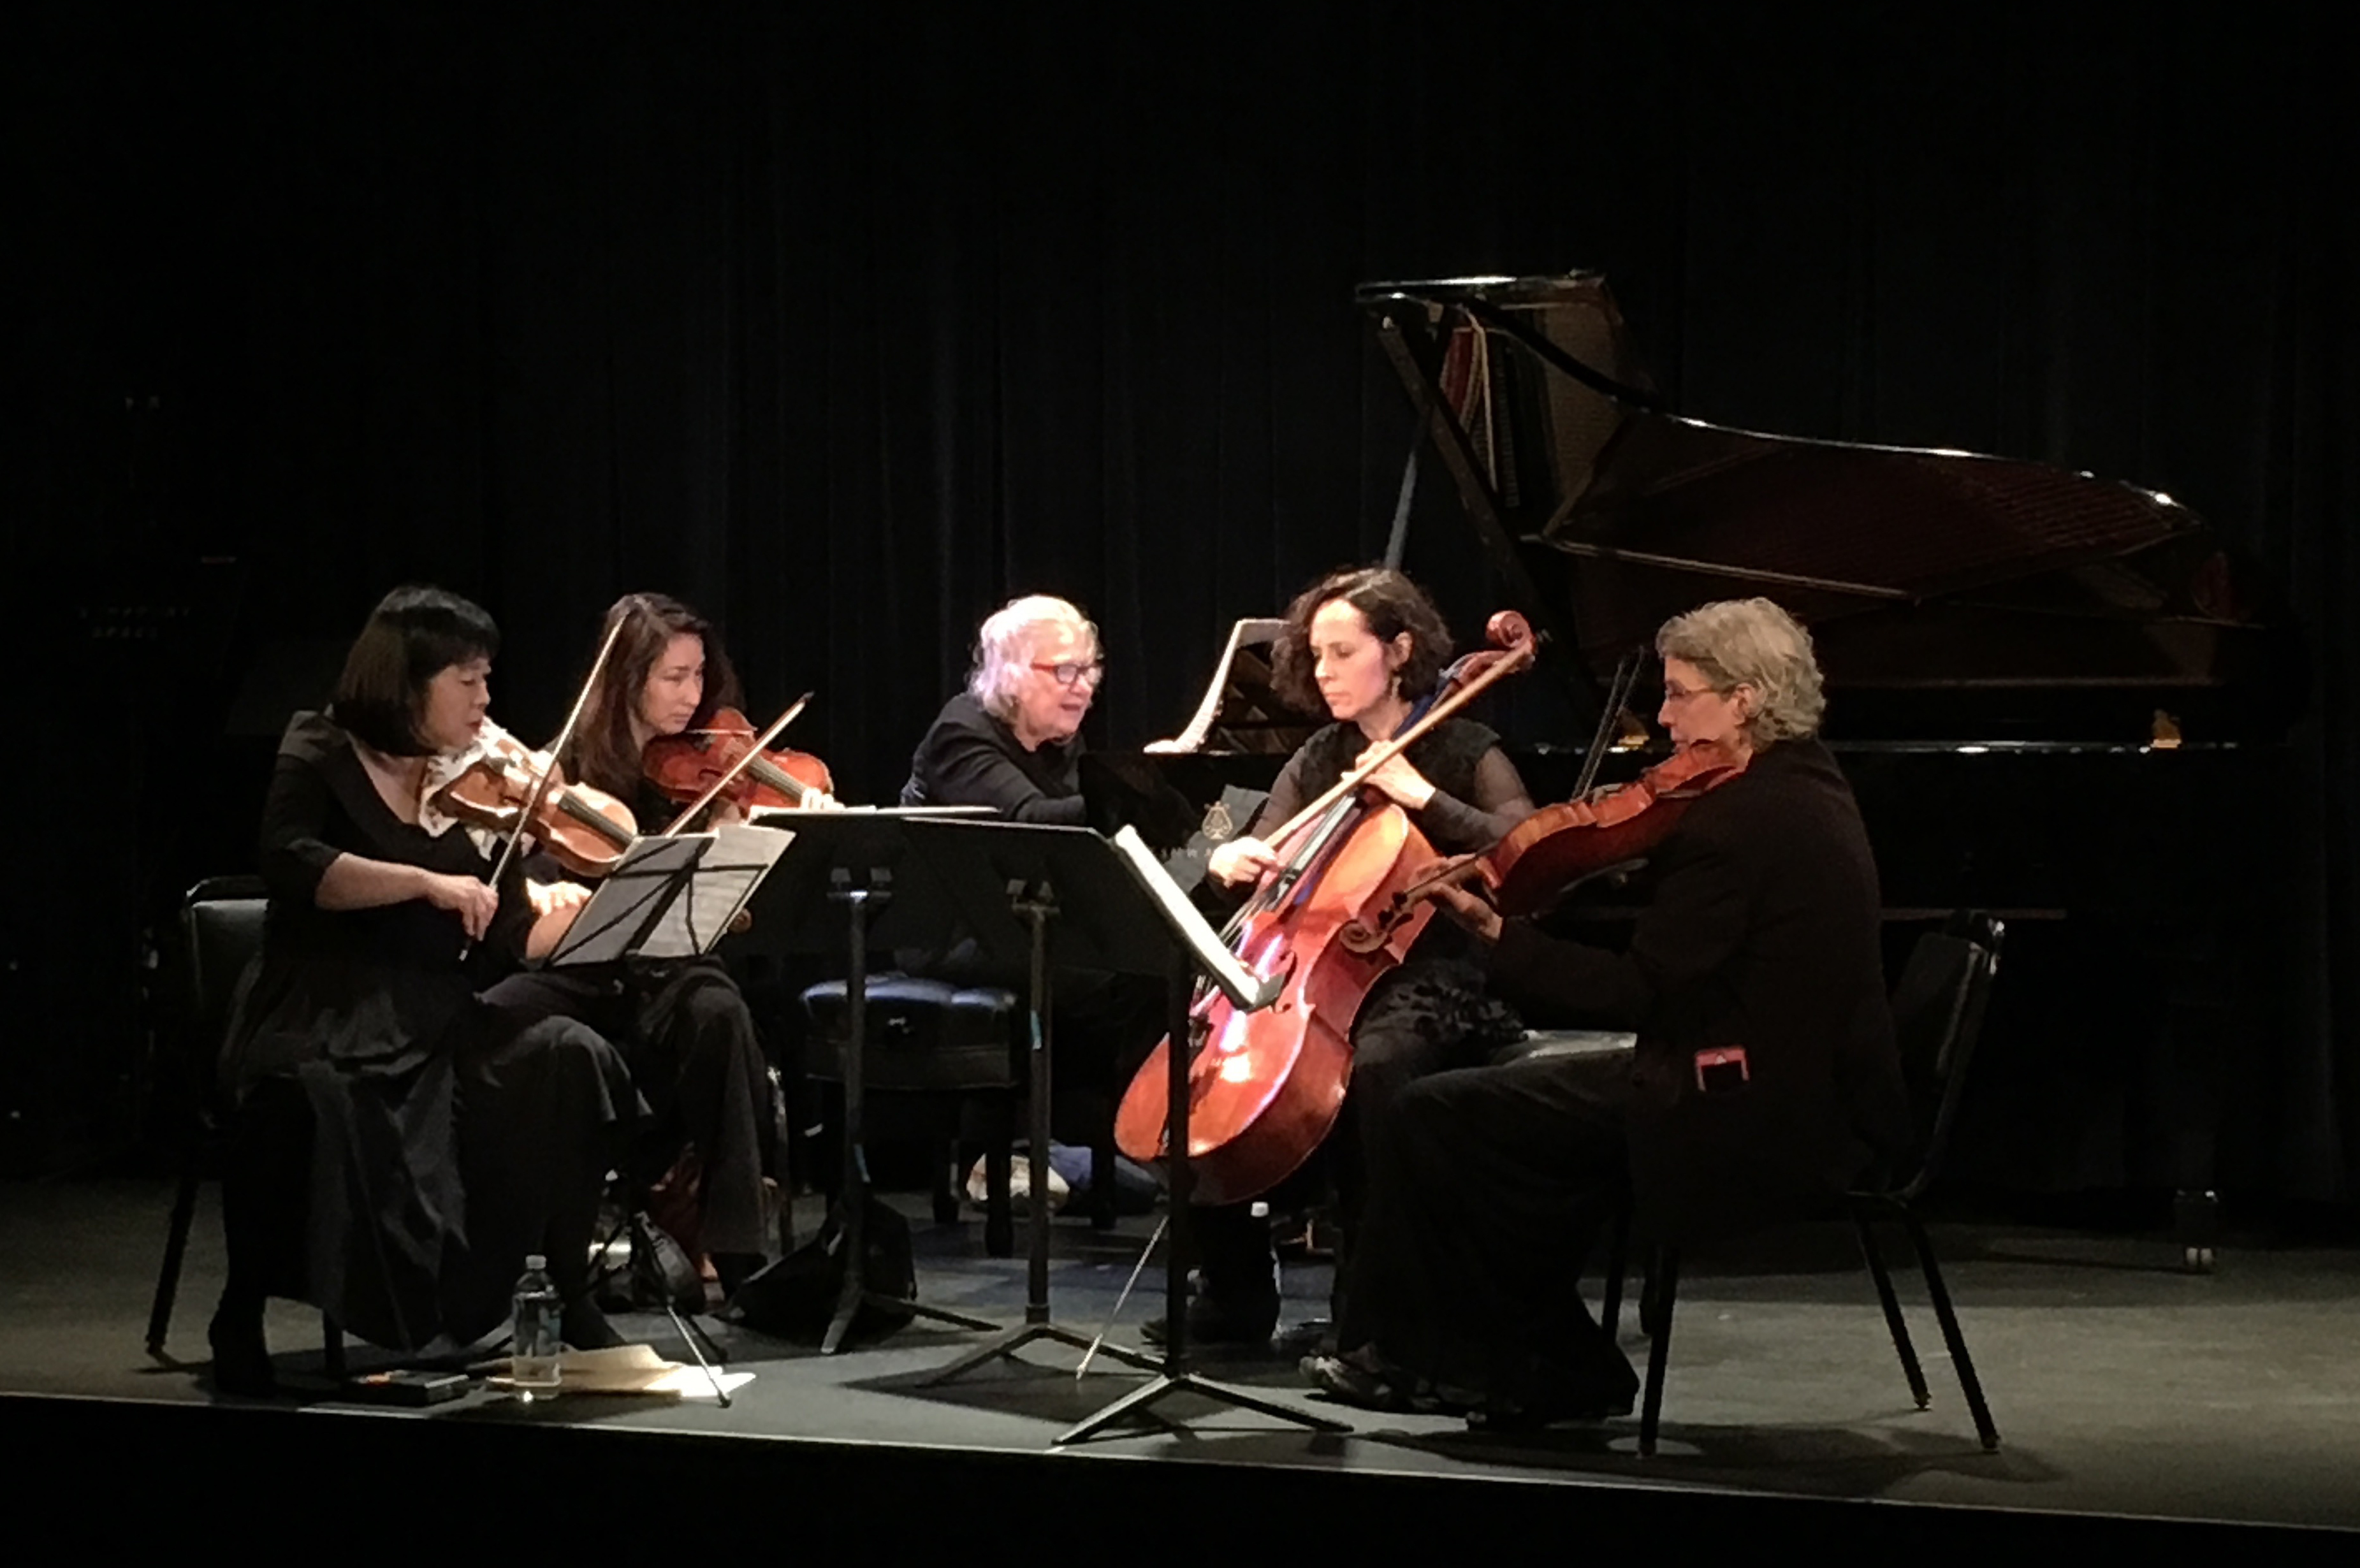 The Cassatt String Quartet performing onstage with pianist Ursula Oppens